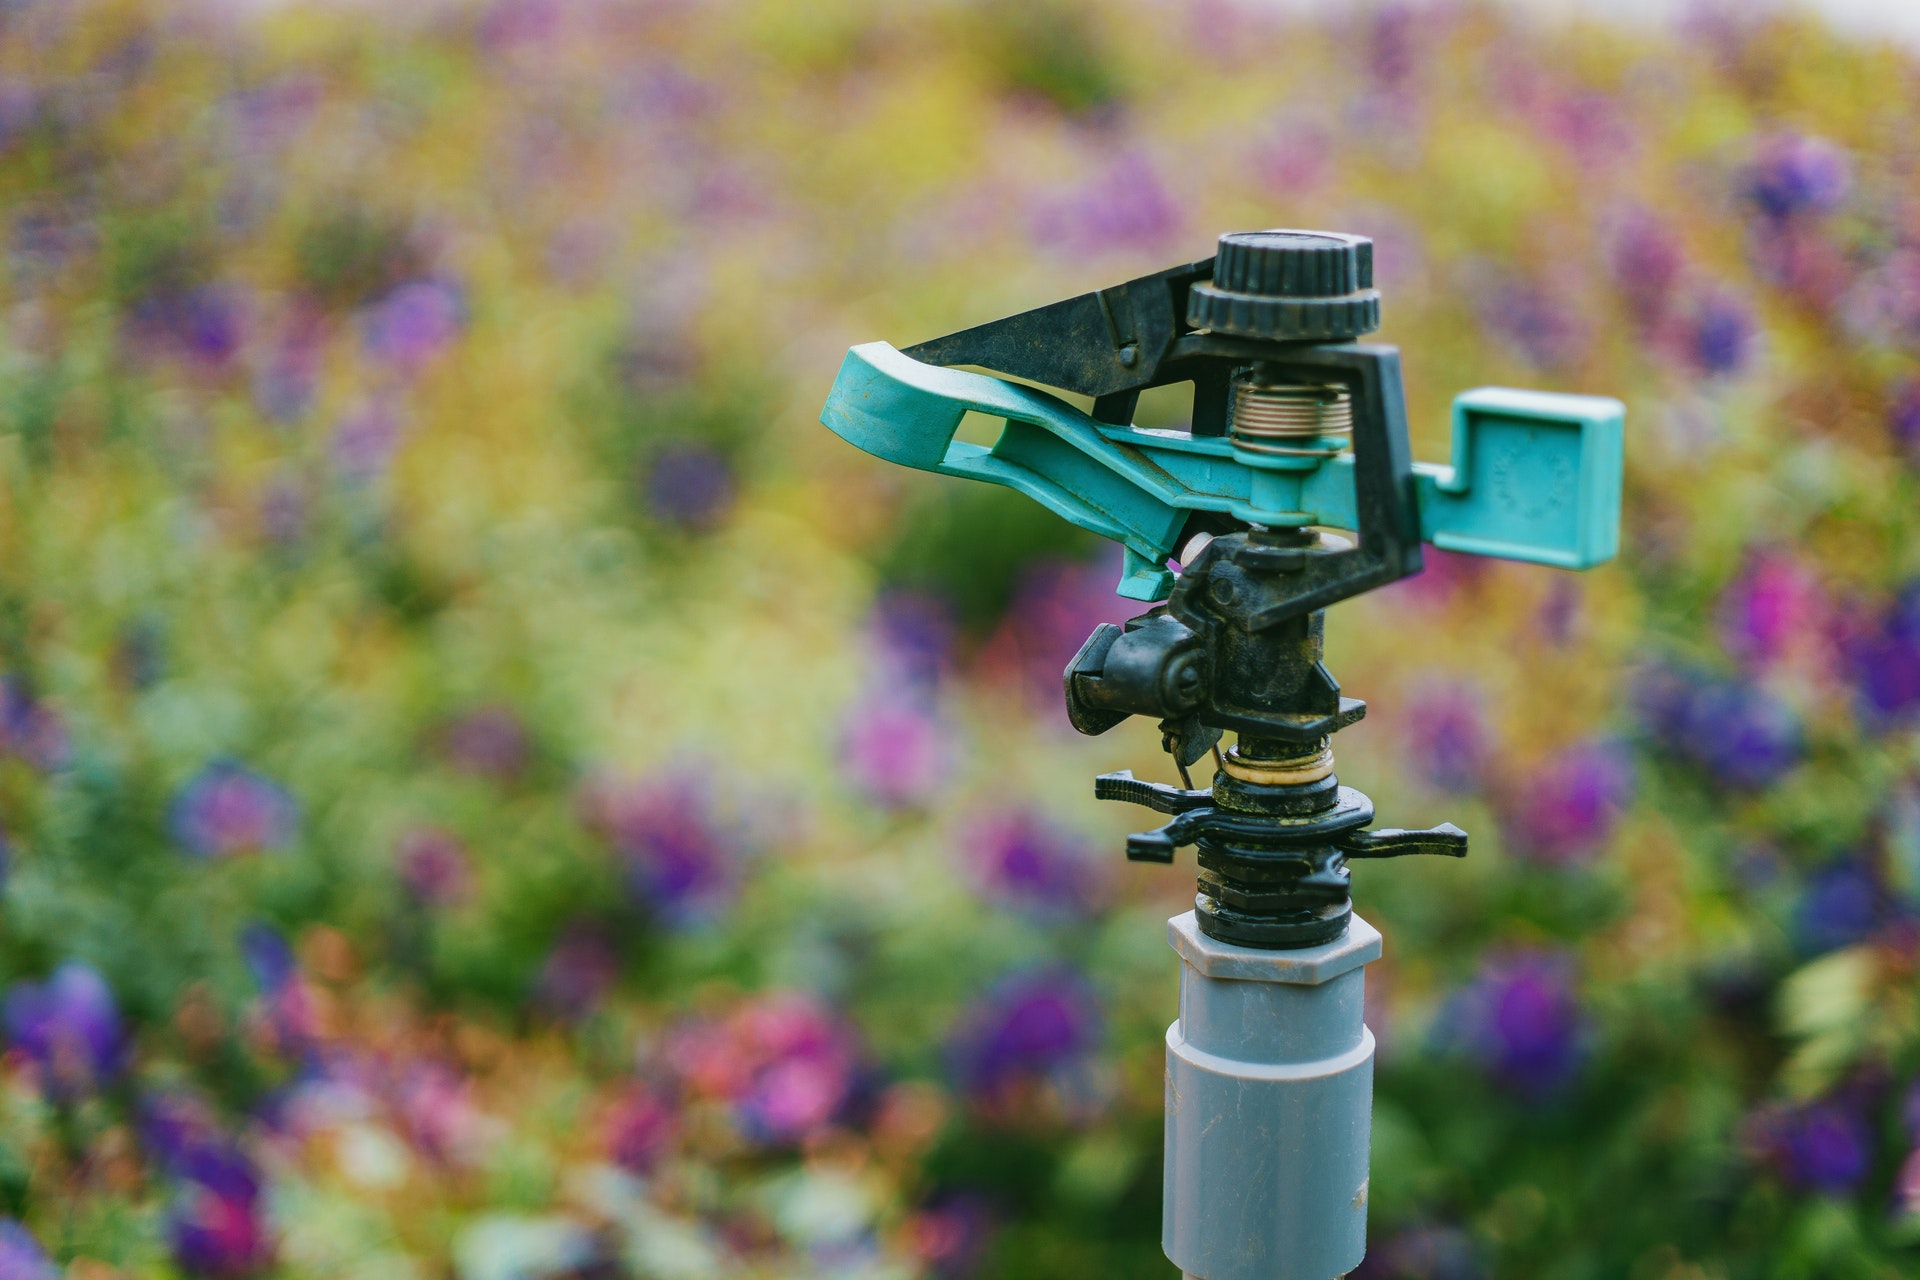 How to Adjust a Lawn Sprinkler: Step-by-Step Instructions